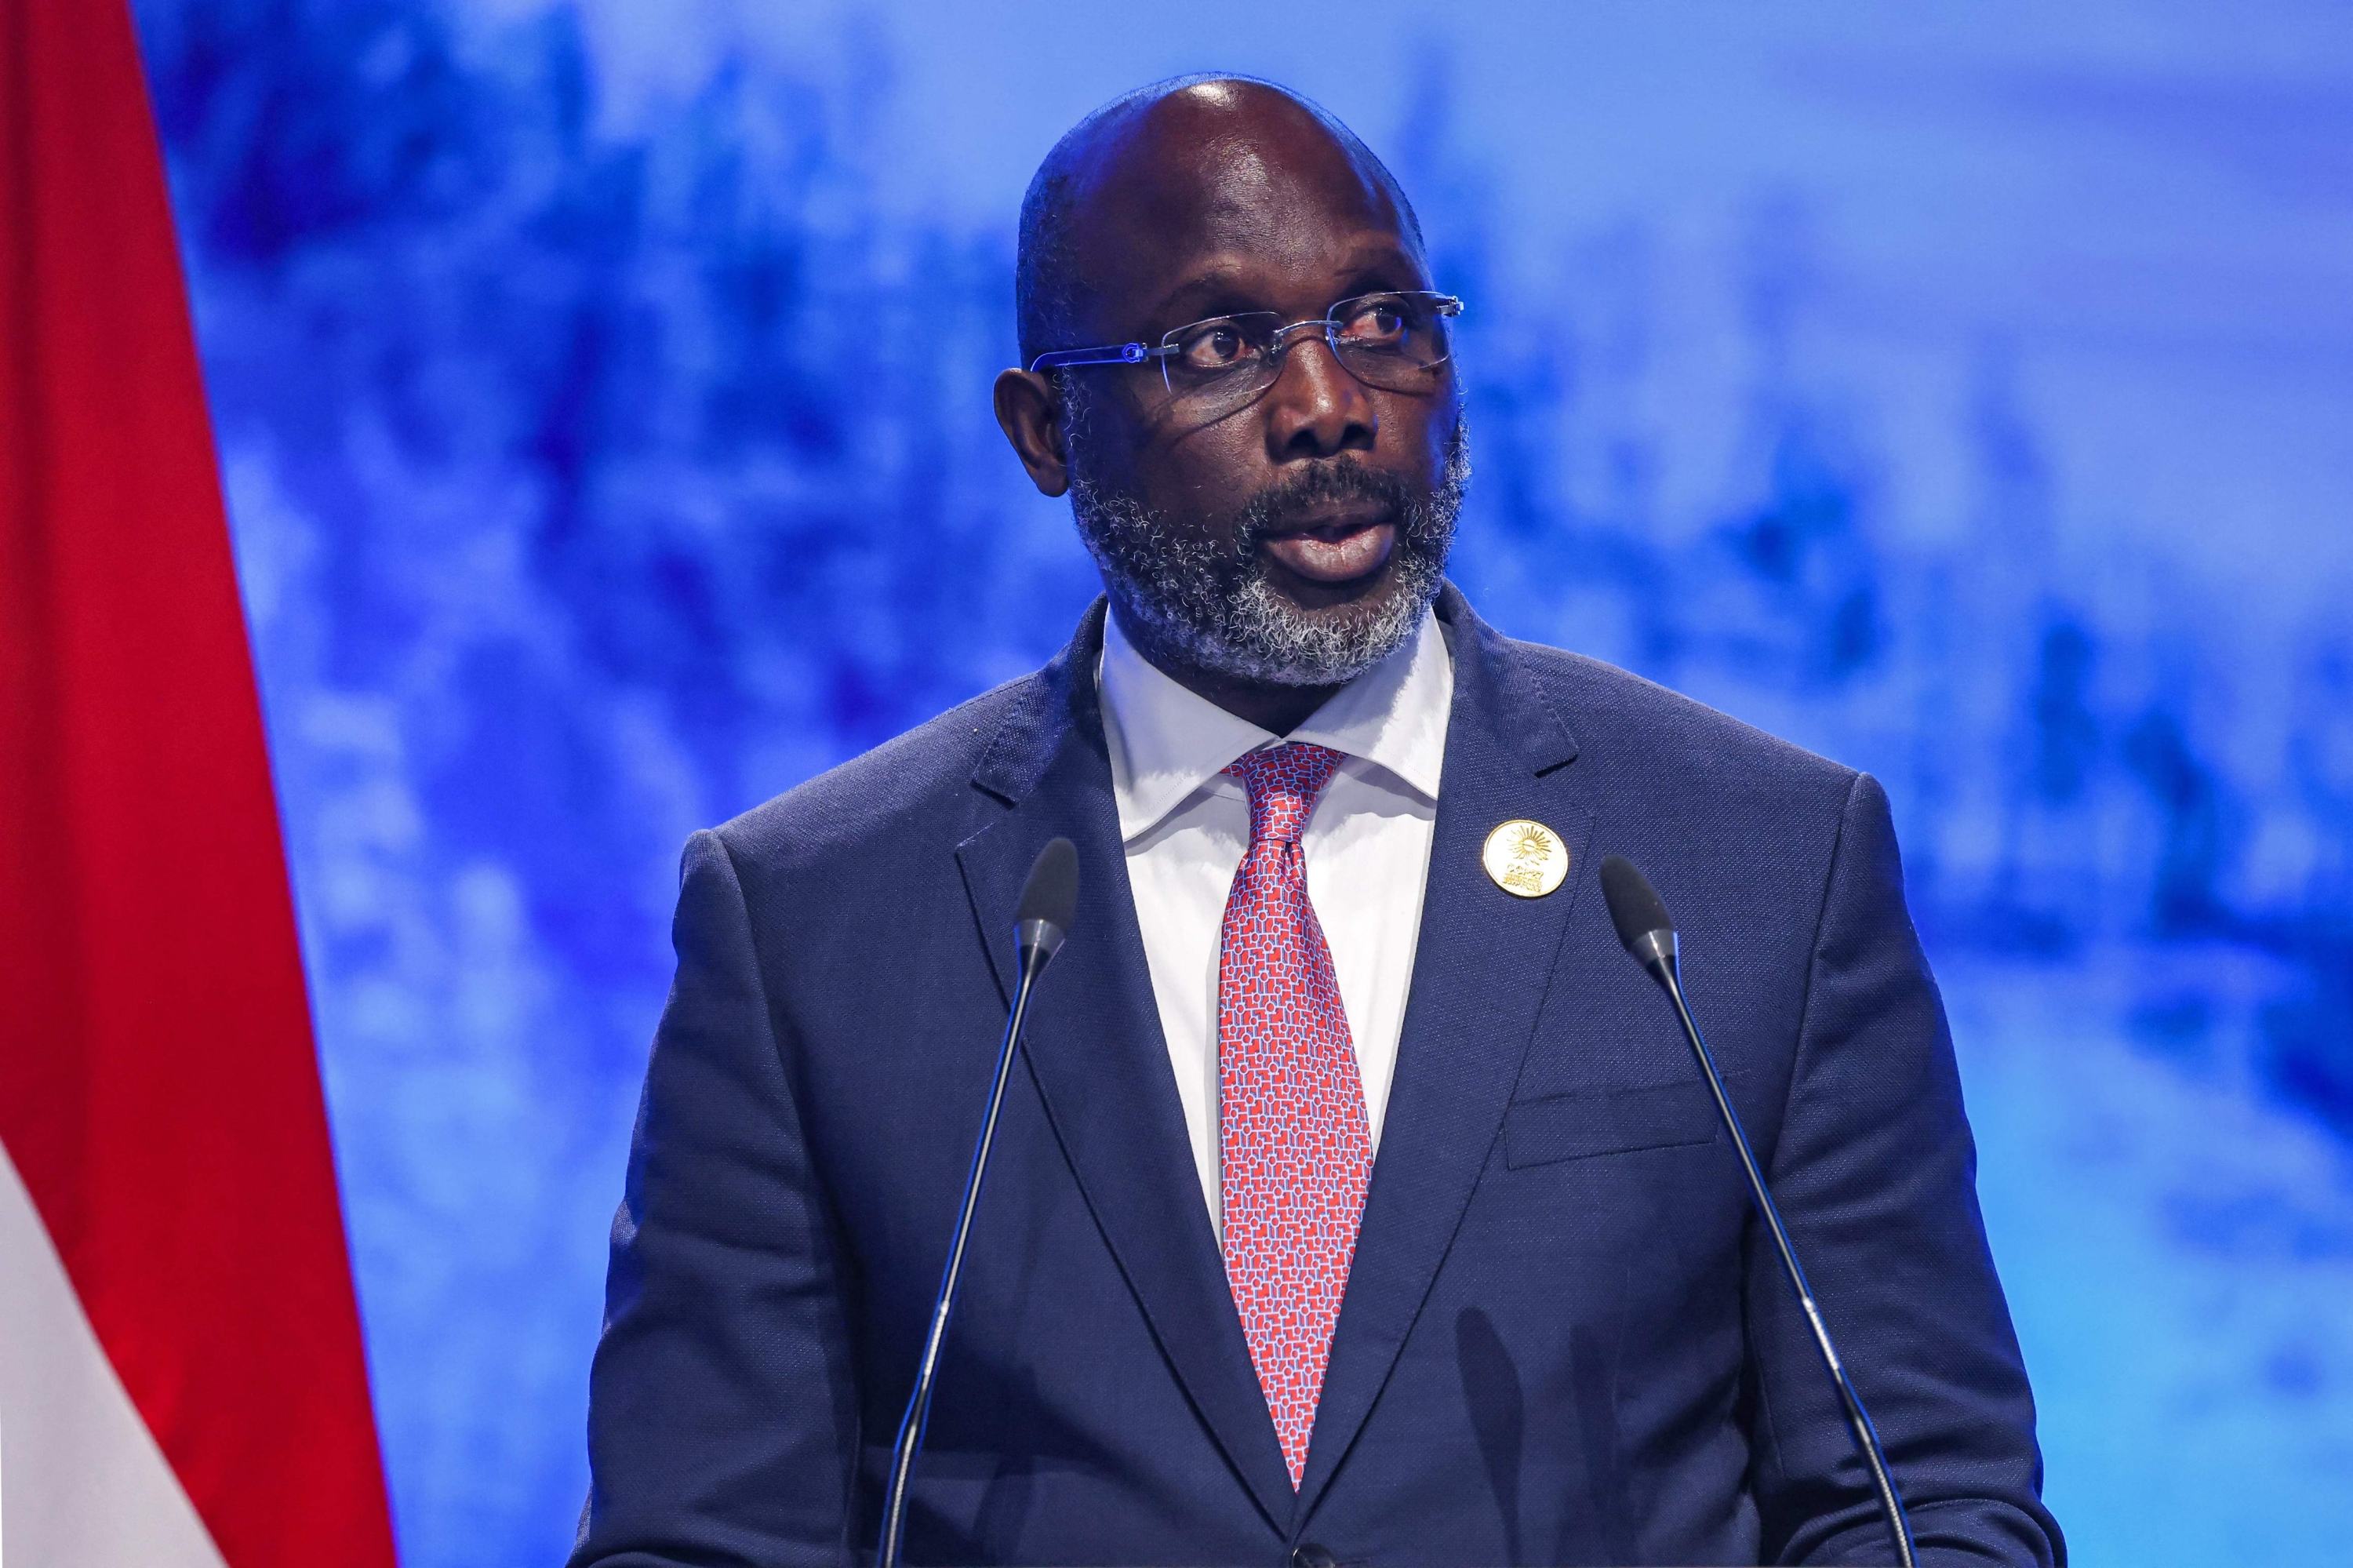 (FILES) Liberia's President George Weah delivers a speech at the leaders summit of the COP27 climate conference at the Sharm el-Sheikh International Convention Centre, in Egypt's Red Sea resort city of the same name, on November 8, 2022. Liberia's incumbent president and football legend George Weah conceded defeat on November 17, 2023 evening after nearly complete returns showed opposition leader Joseph Boakai leading with 50.89 percent of the vote. (Photo by AHMAD GHARABLI / AFP)